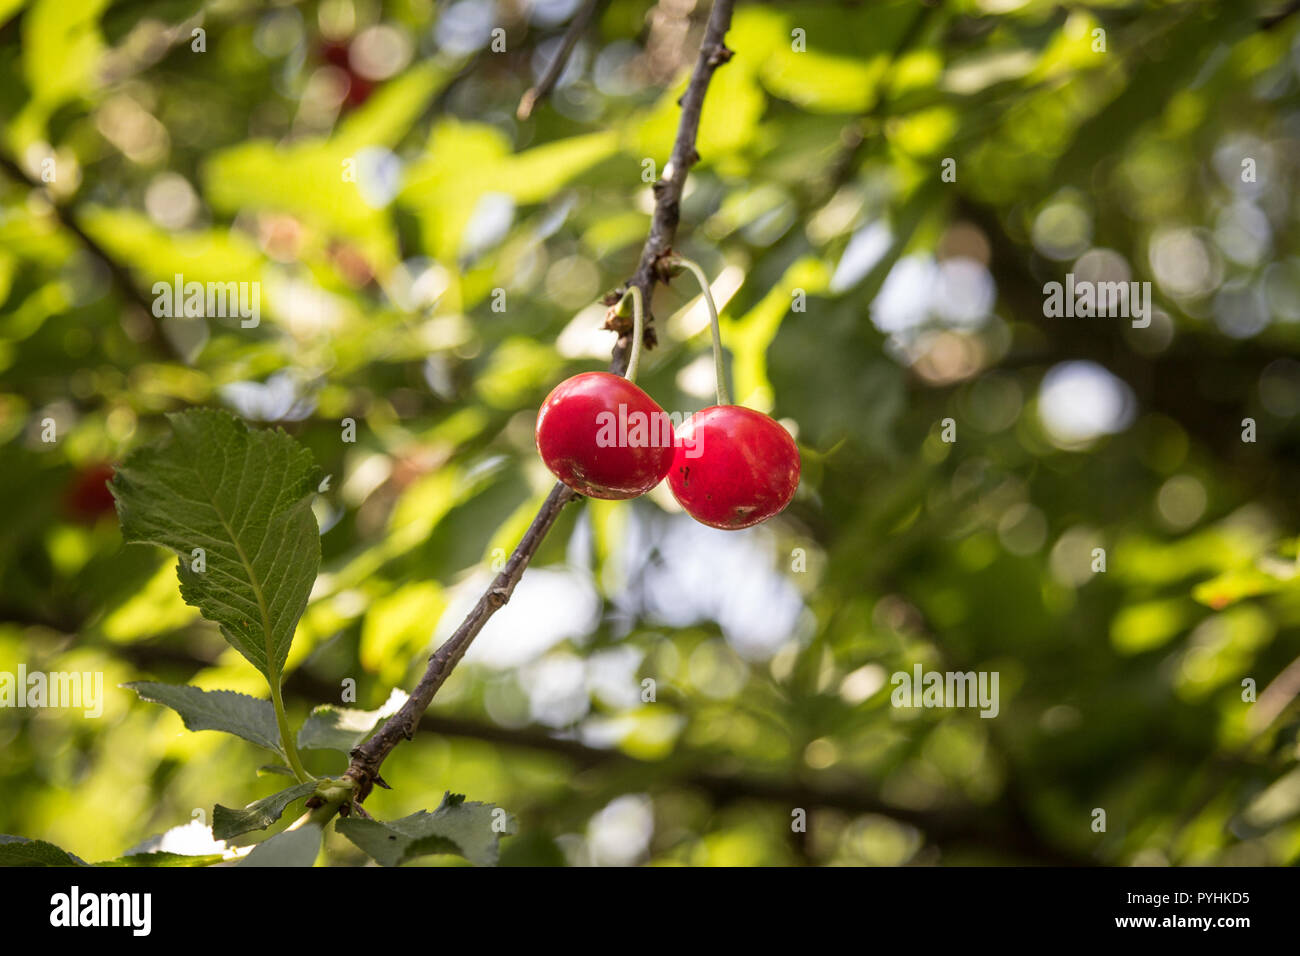 Two red cherries hanging on a tree, surrounded by the green leaves of a cherry tree, during a sunny spring afternoon, in a fruits garden  Picture of a Stock Photo